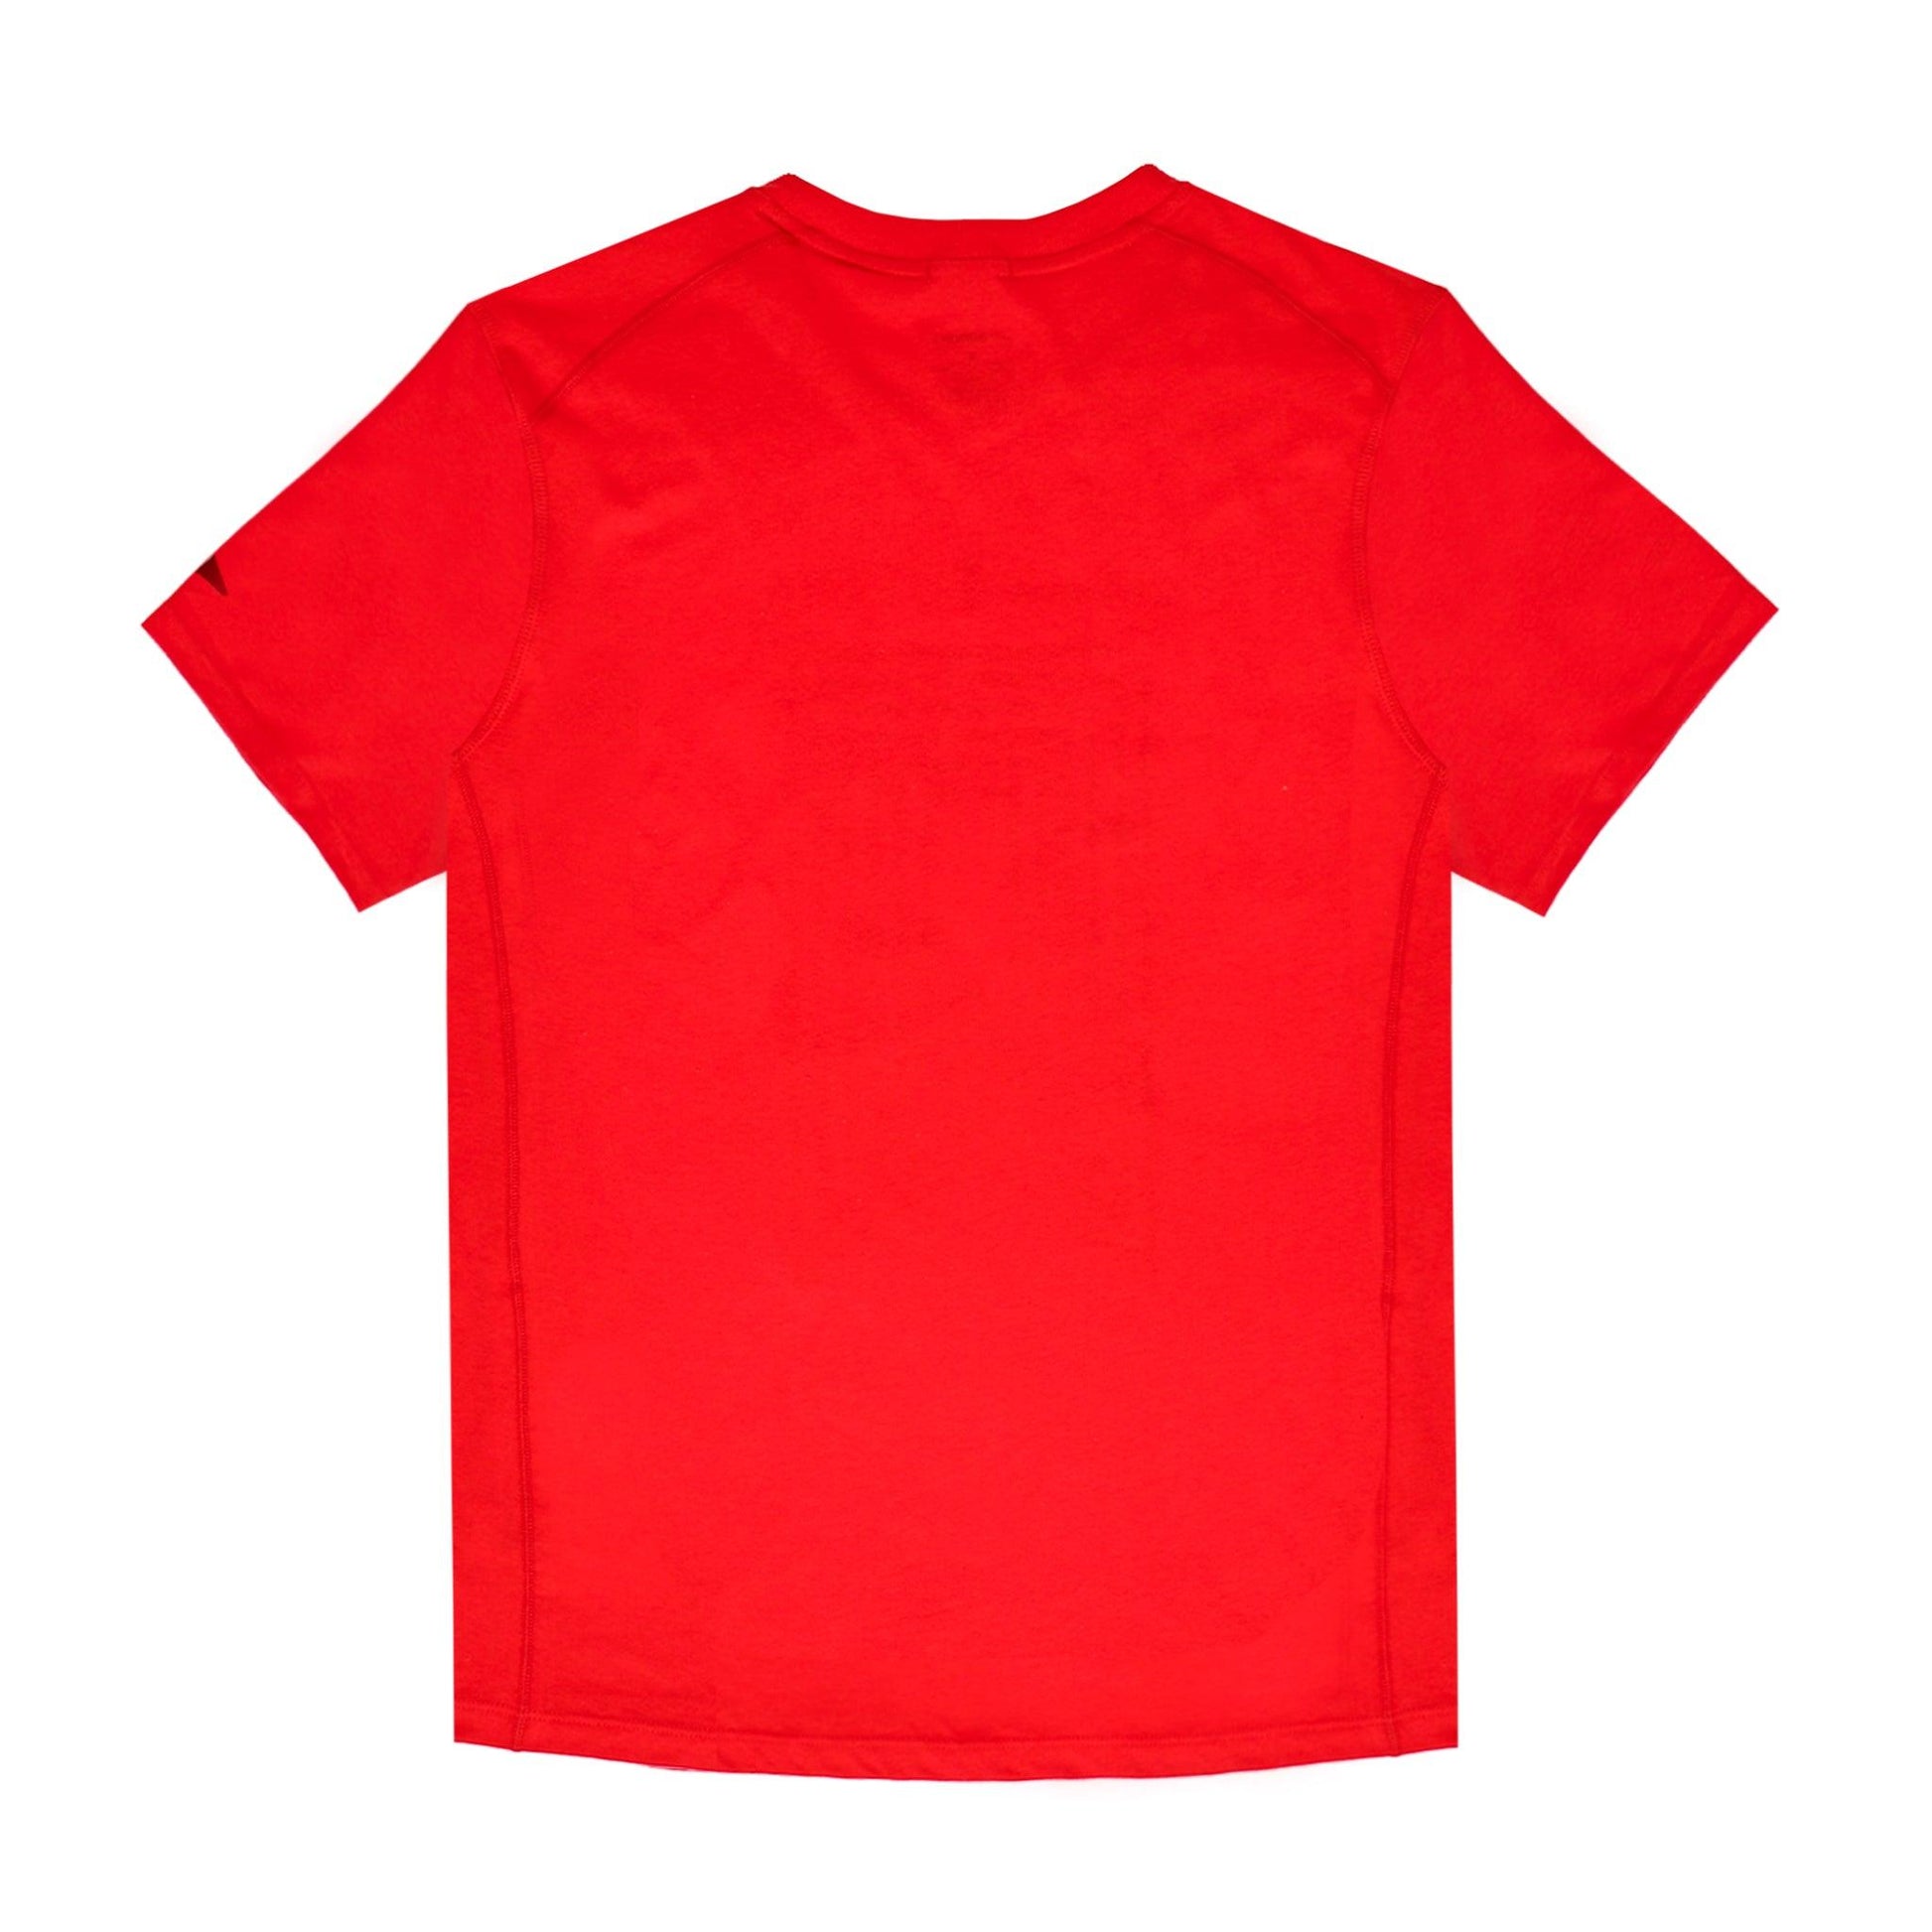 michelob-ultra-brooks-athletic-tee-red-back